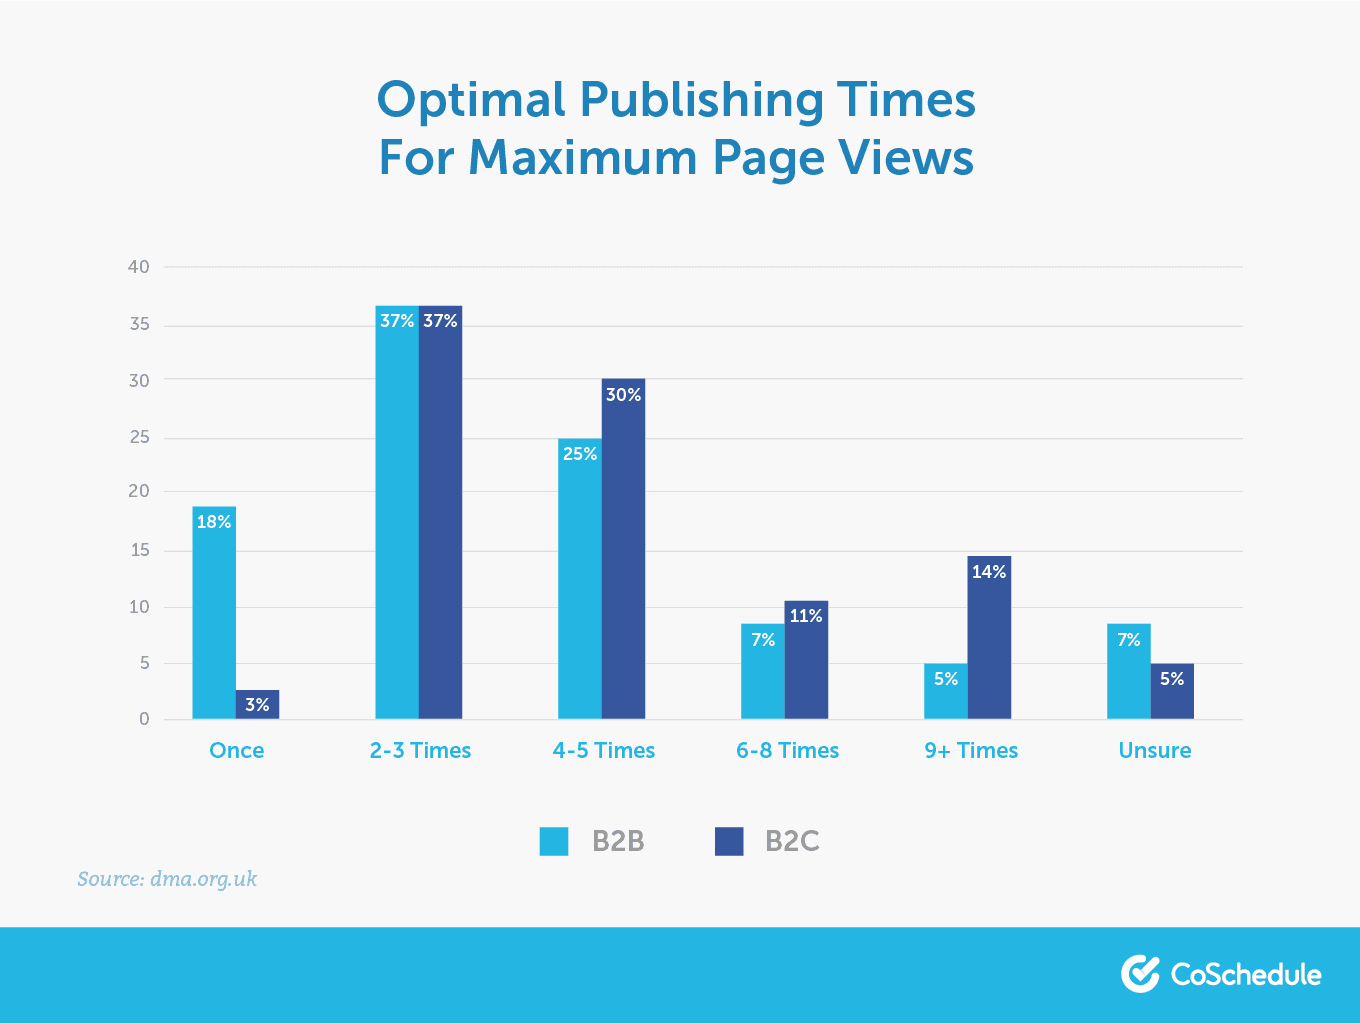 Optimal email publishing times